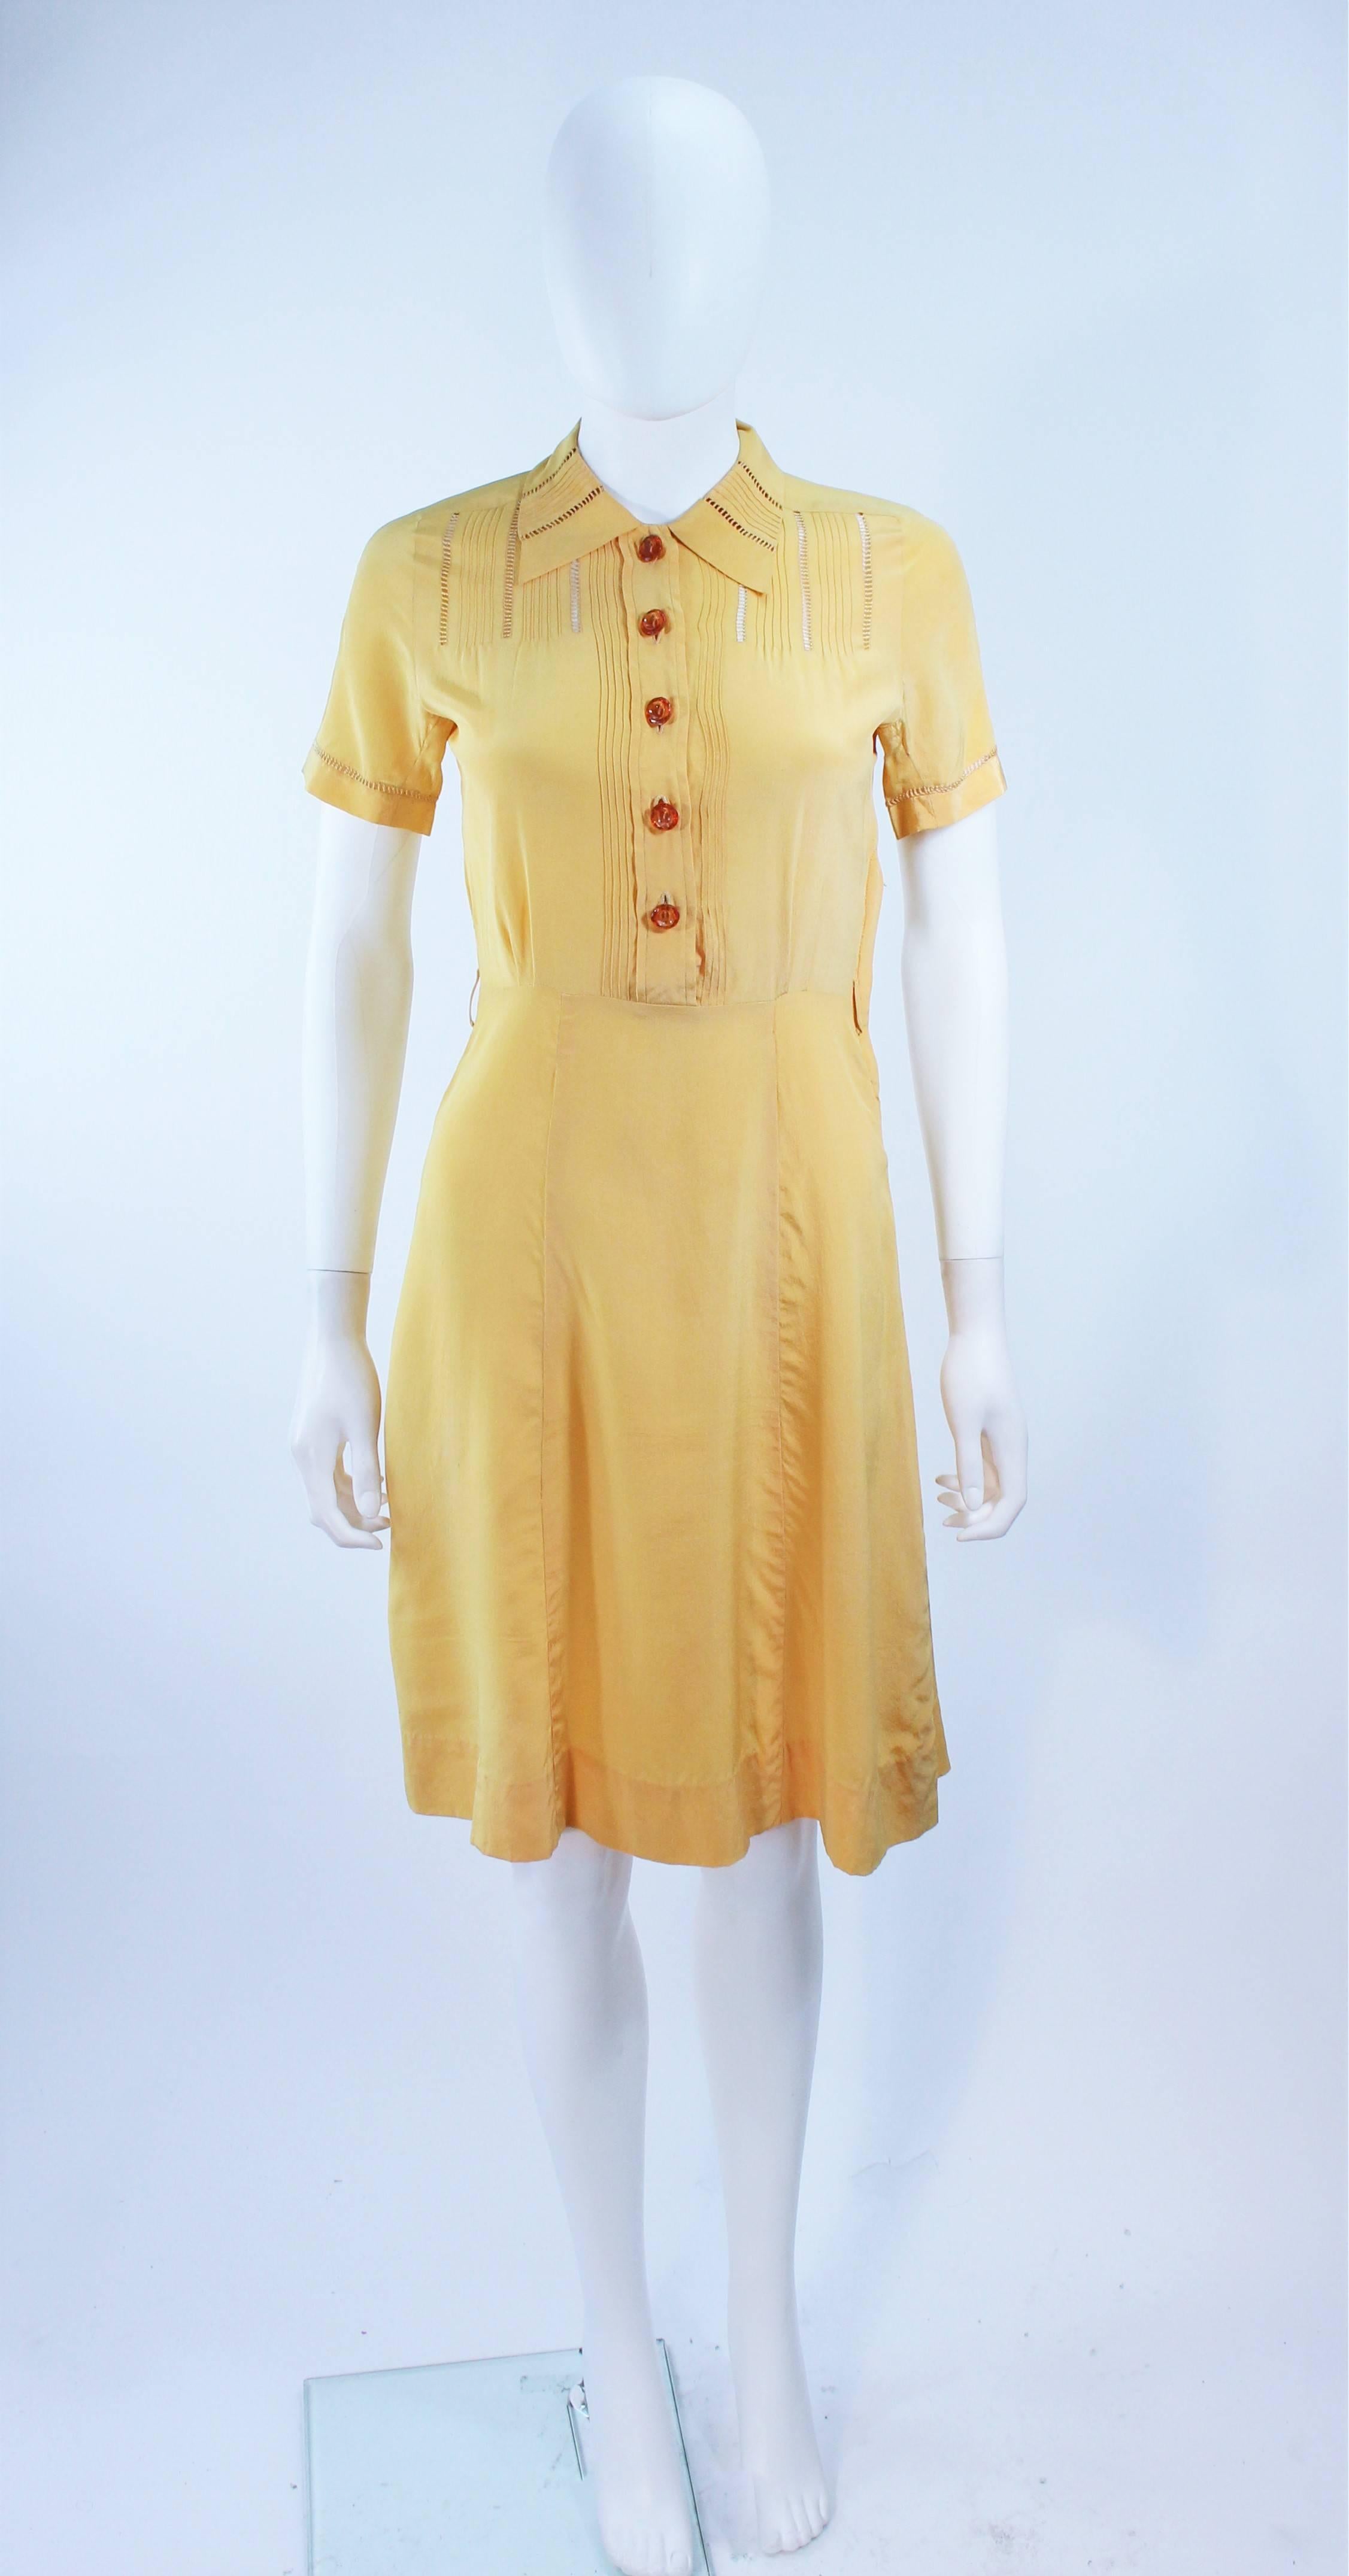 This dress is composed of a yellow hue silk. Features sheer lace inserts, front pockets, and center front buttons. In excellent vintage condition, some slight discoloration due to age.

**Please cross-reference measurements for personal accuracy.